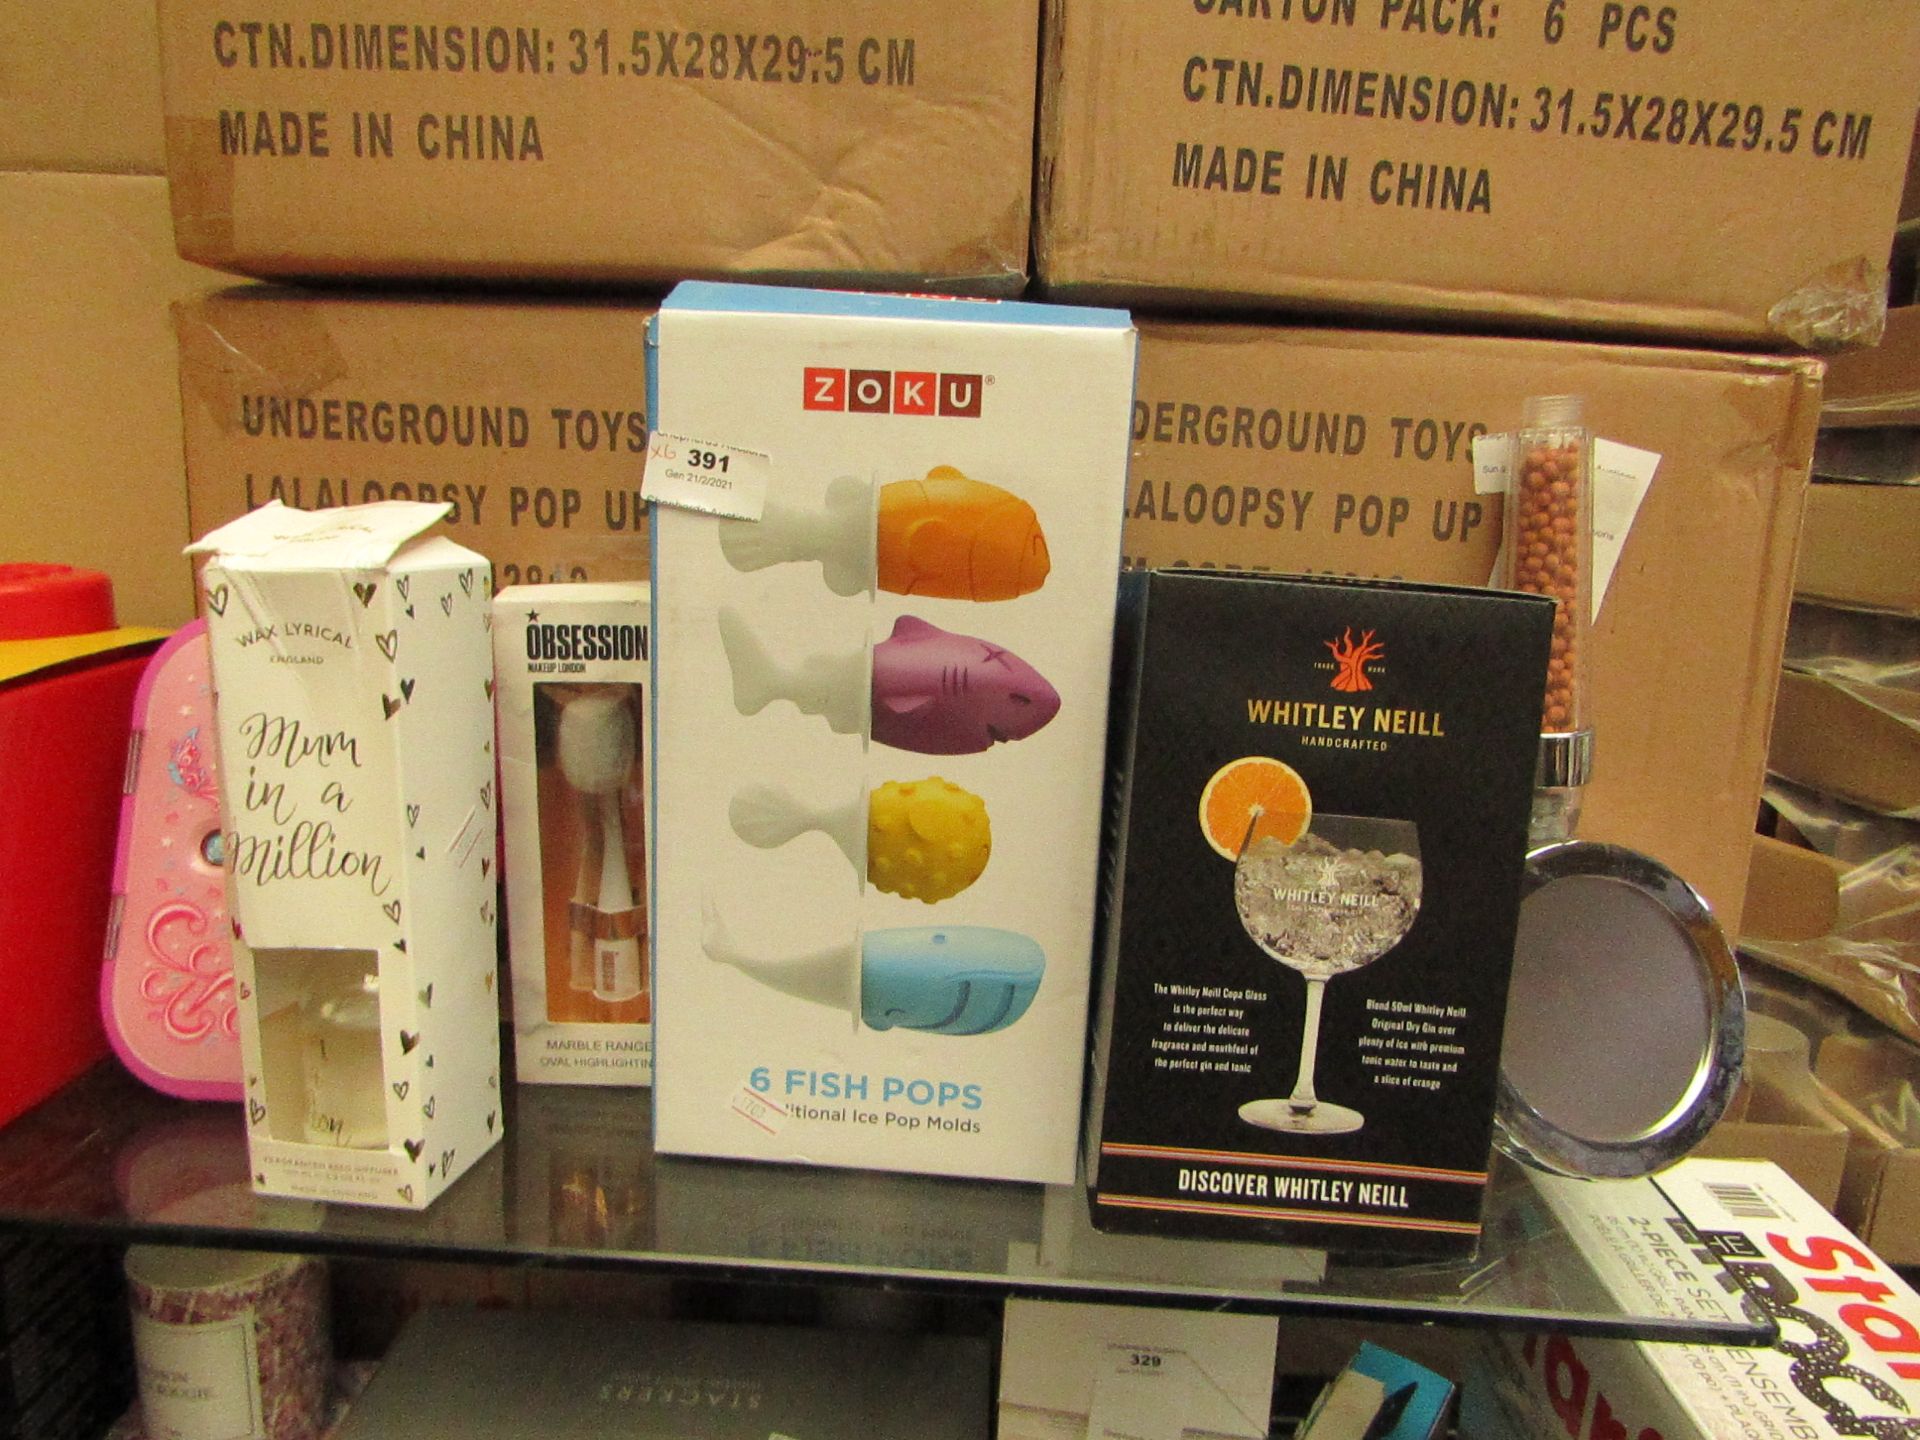 Zoku 6 Fish Pops Traditional Ice Pop Moulds - Boxed & Unchecked